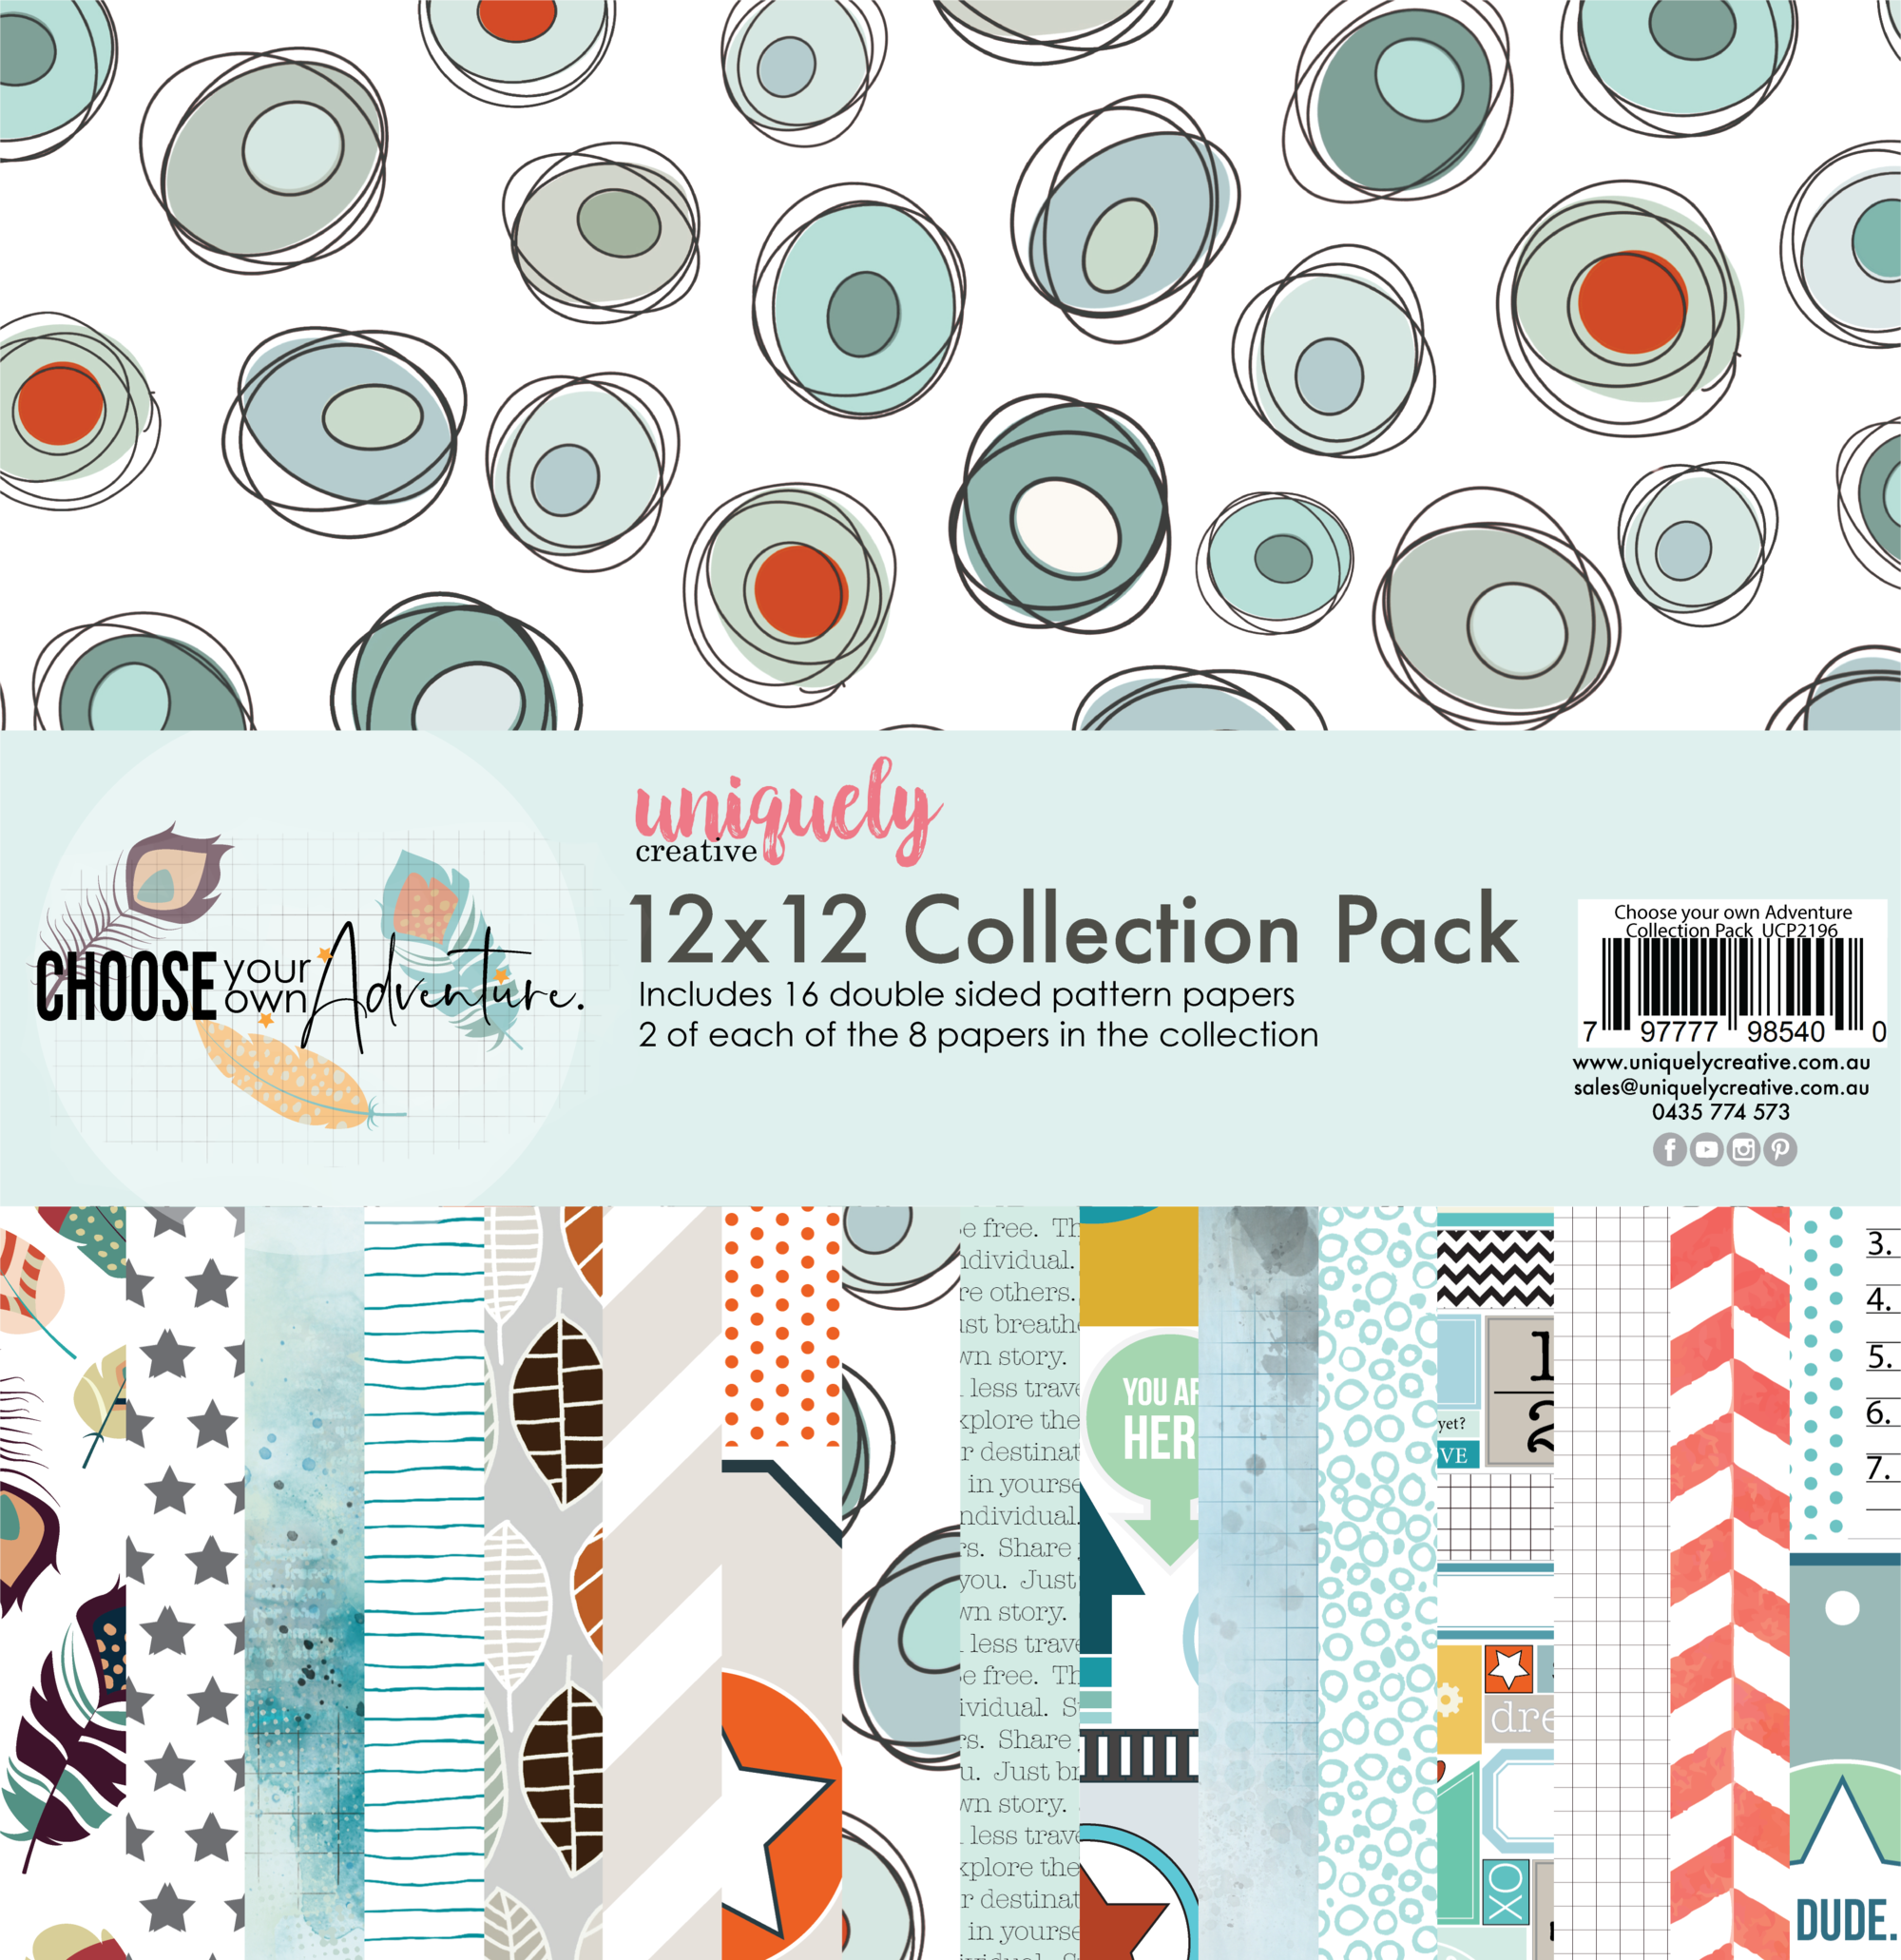 Uniquely Creative - Choose Your Own Adventure - 12x12 Collection Pack